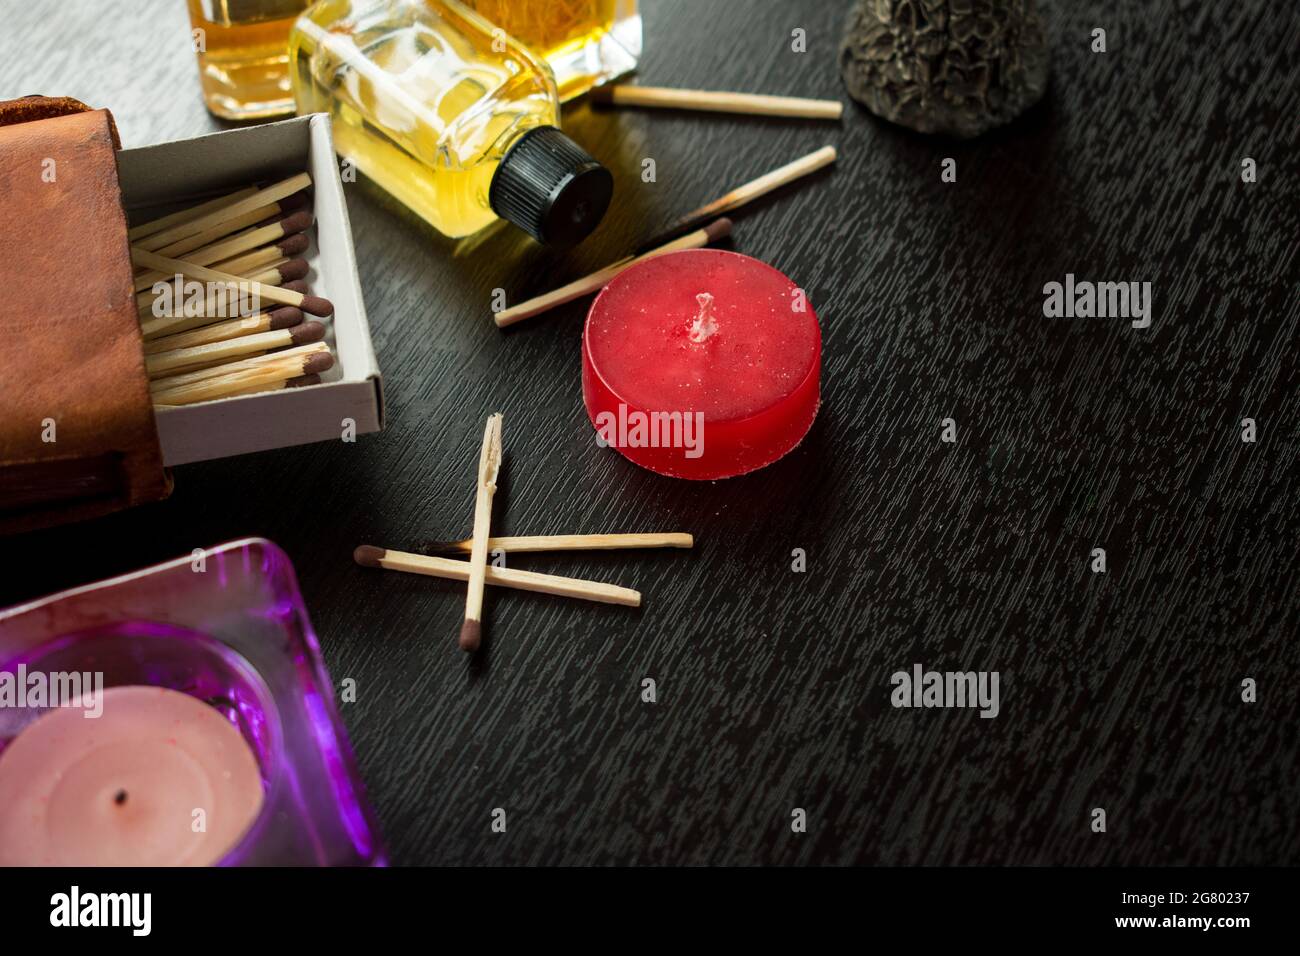 Some wooden matches in a matches box, candles and some glass flovering bottles on a black wooden table Stock Photo